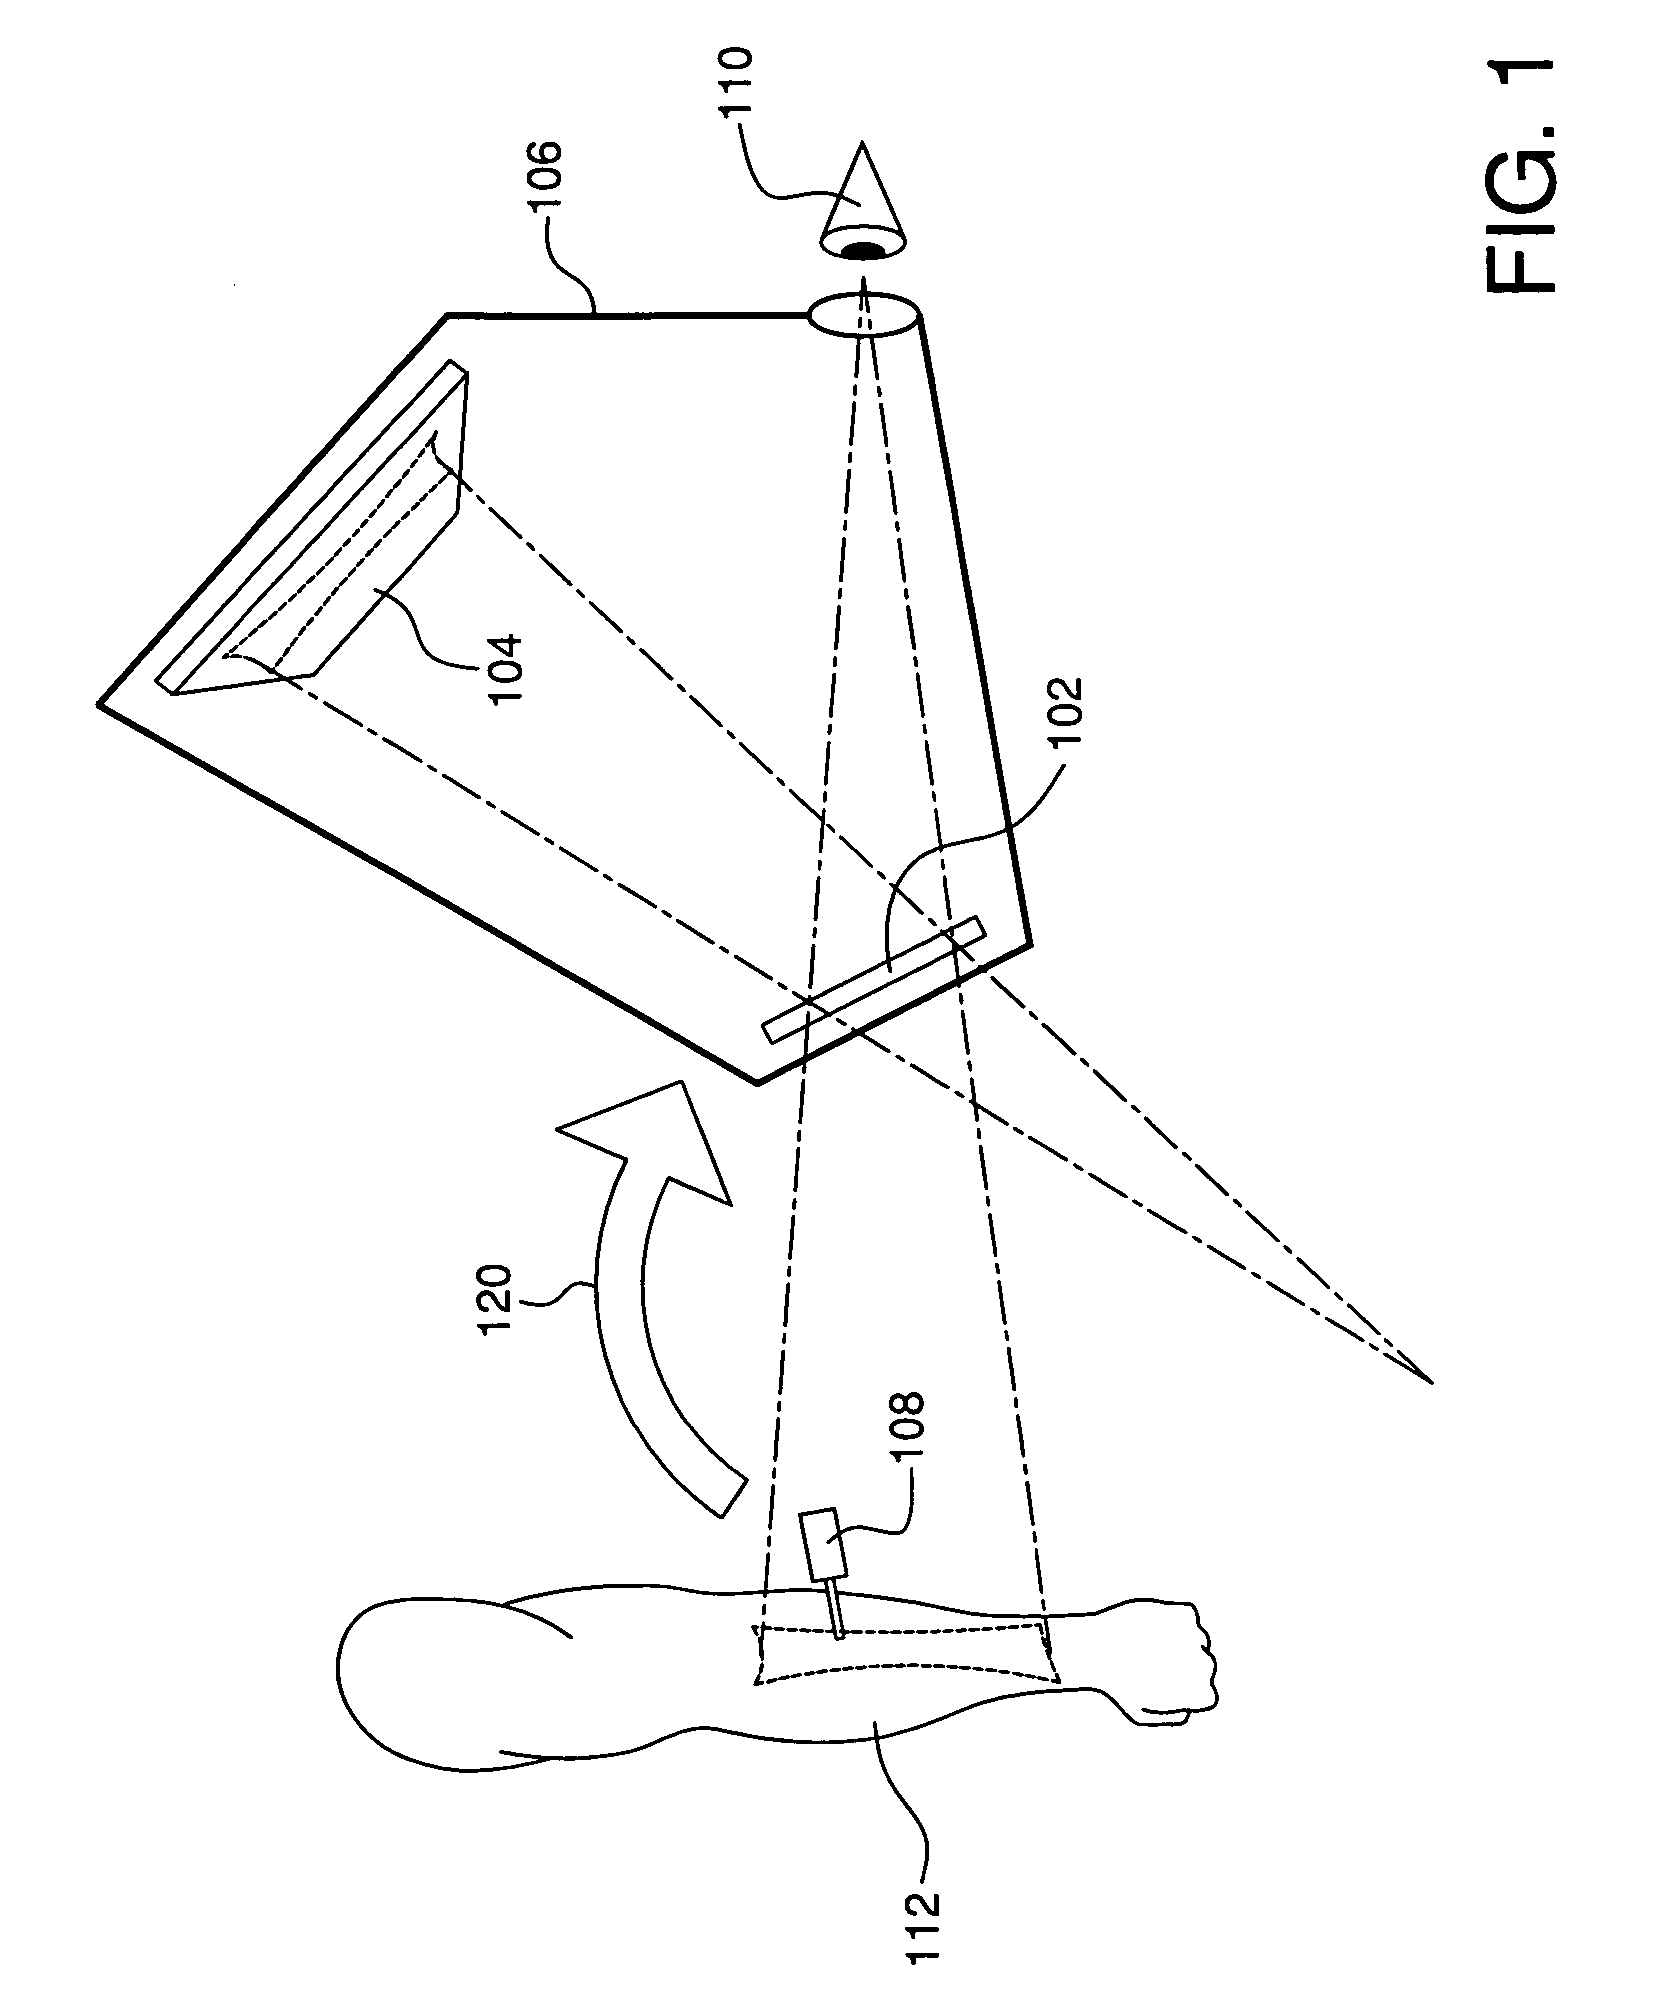 Augmented reality device and method